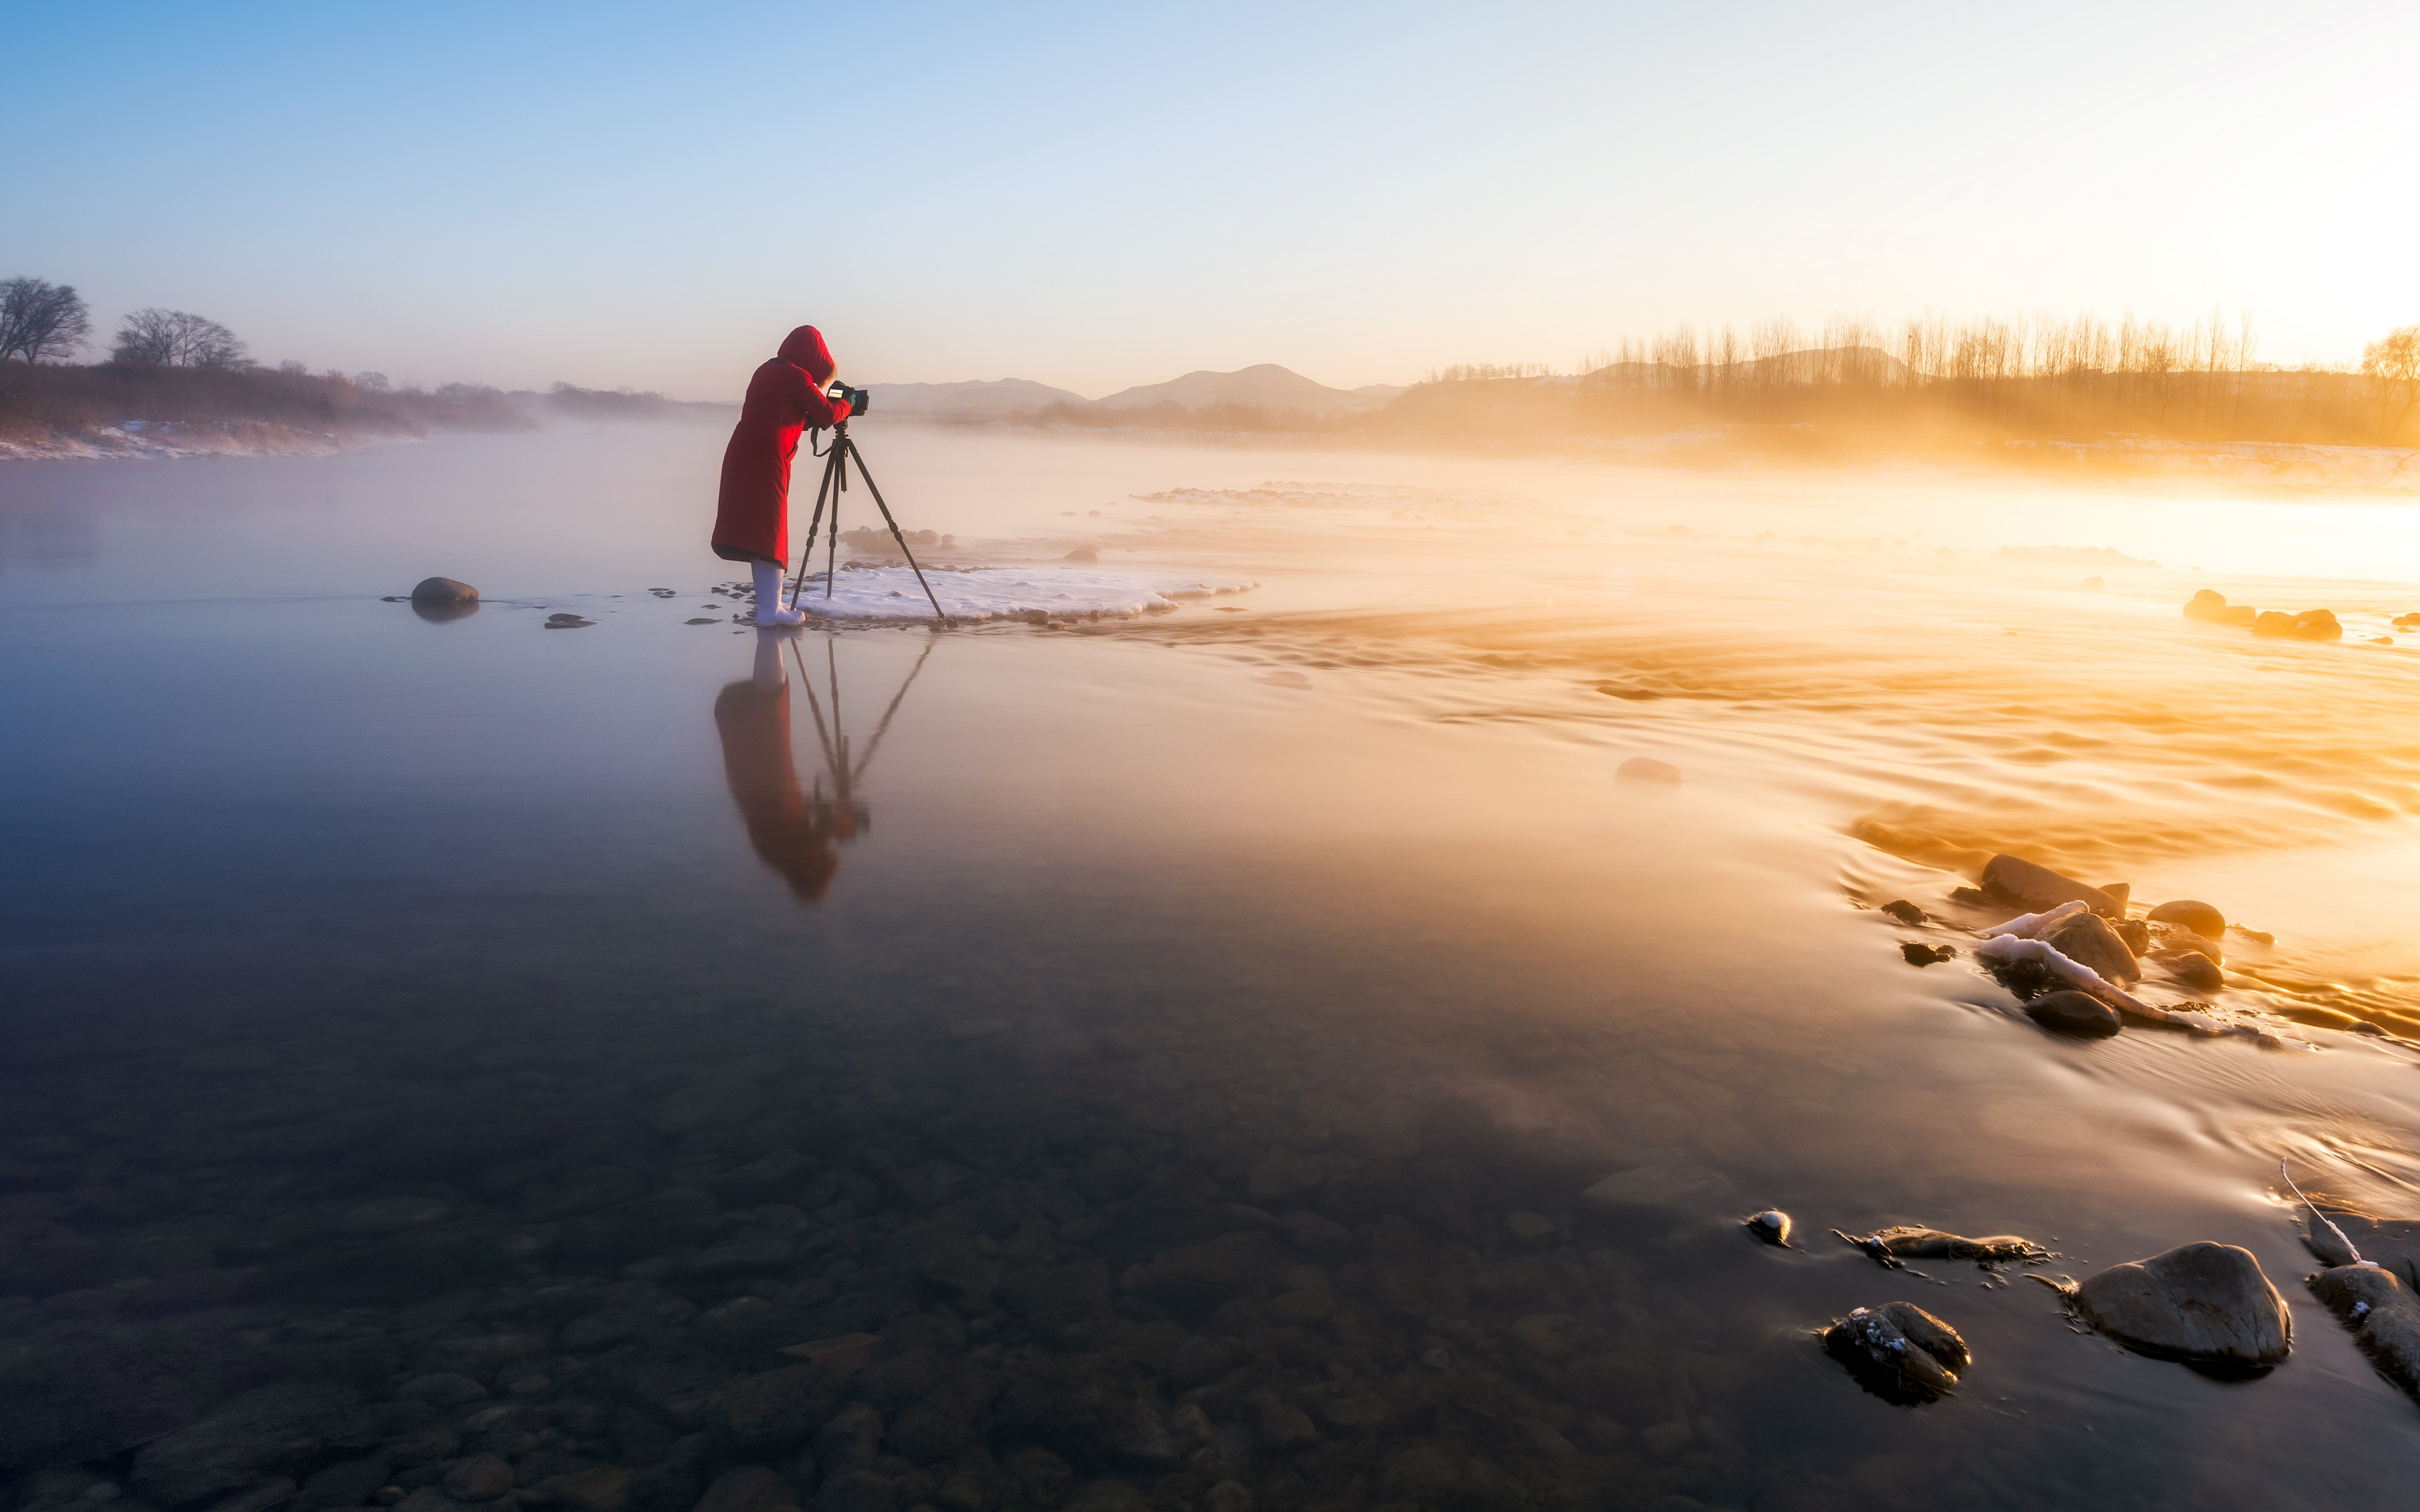 A photographer takes stunning sunrise shots on a shallow river